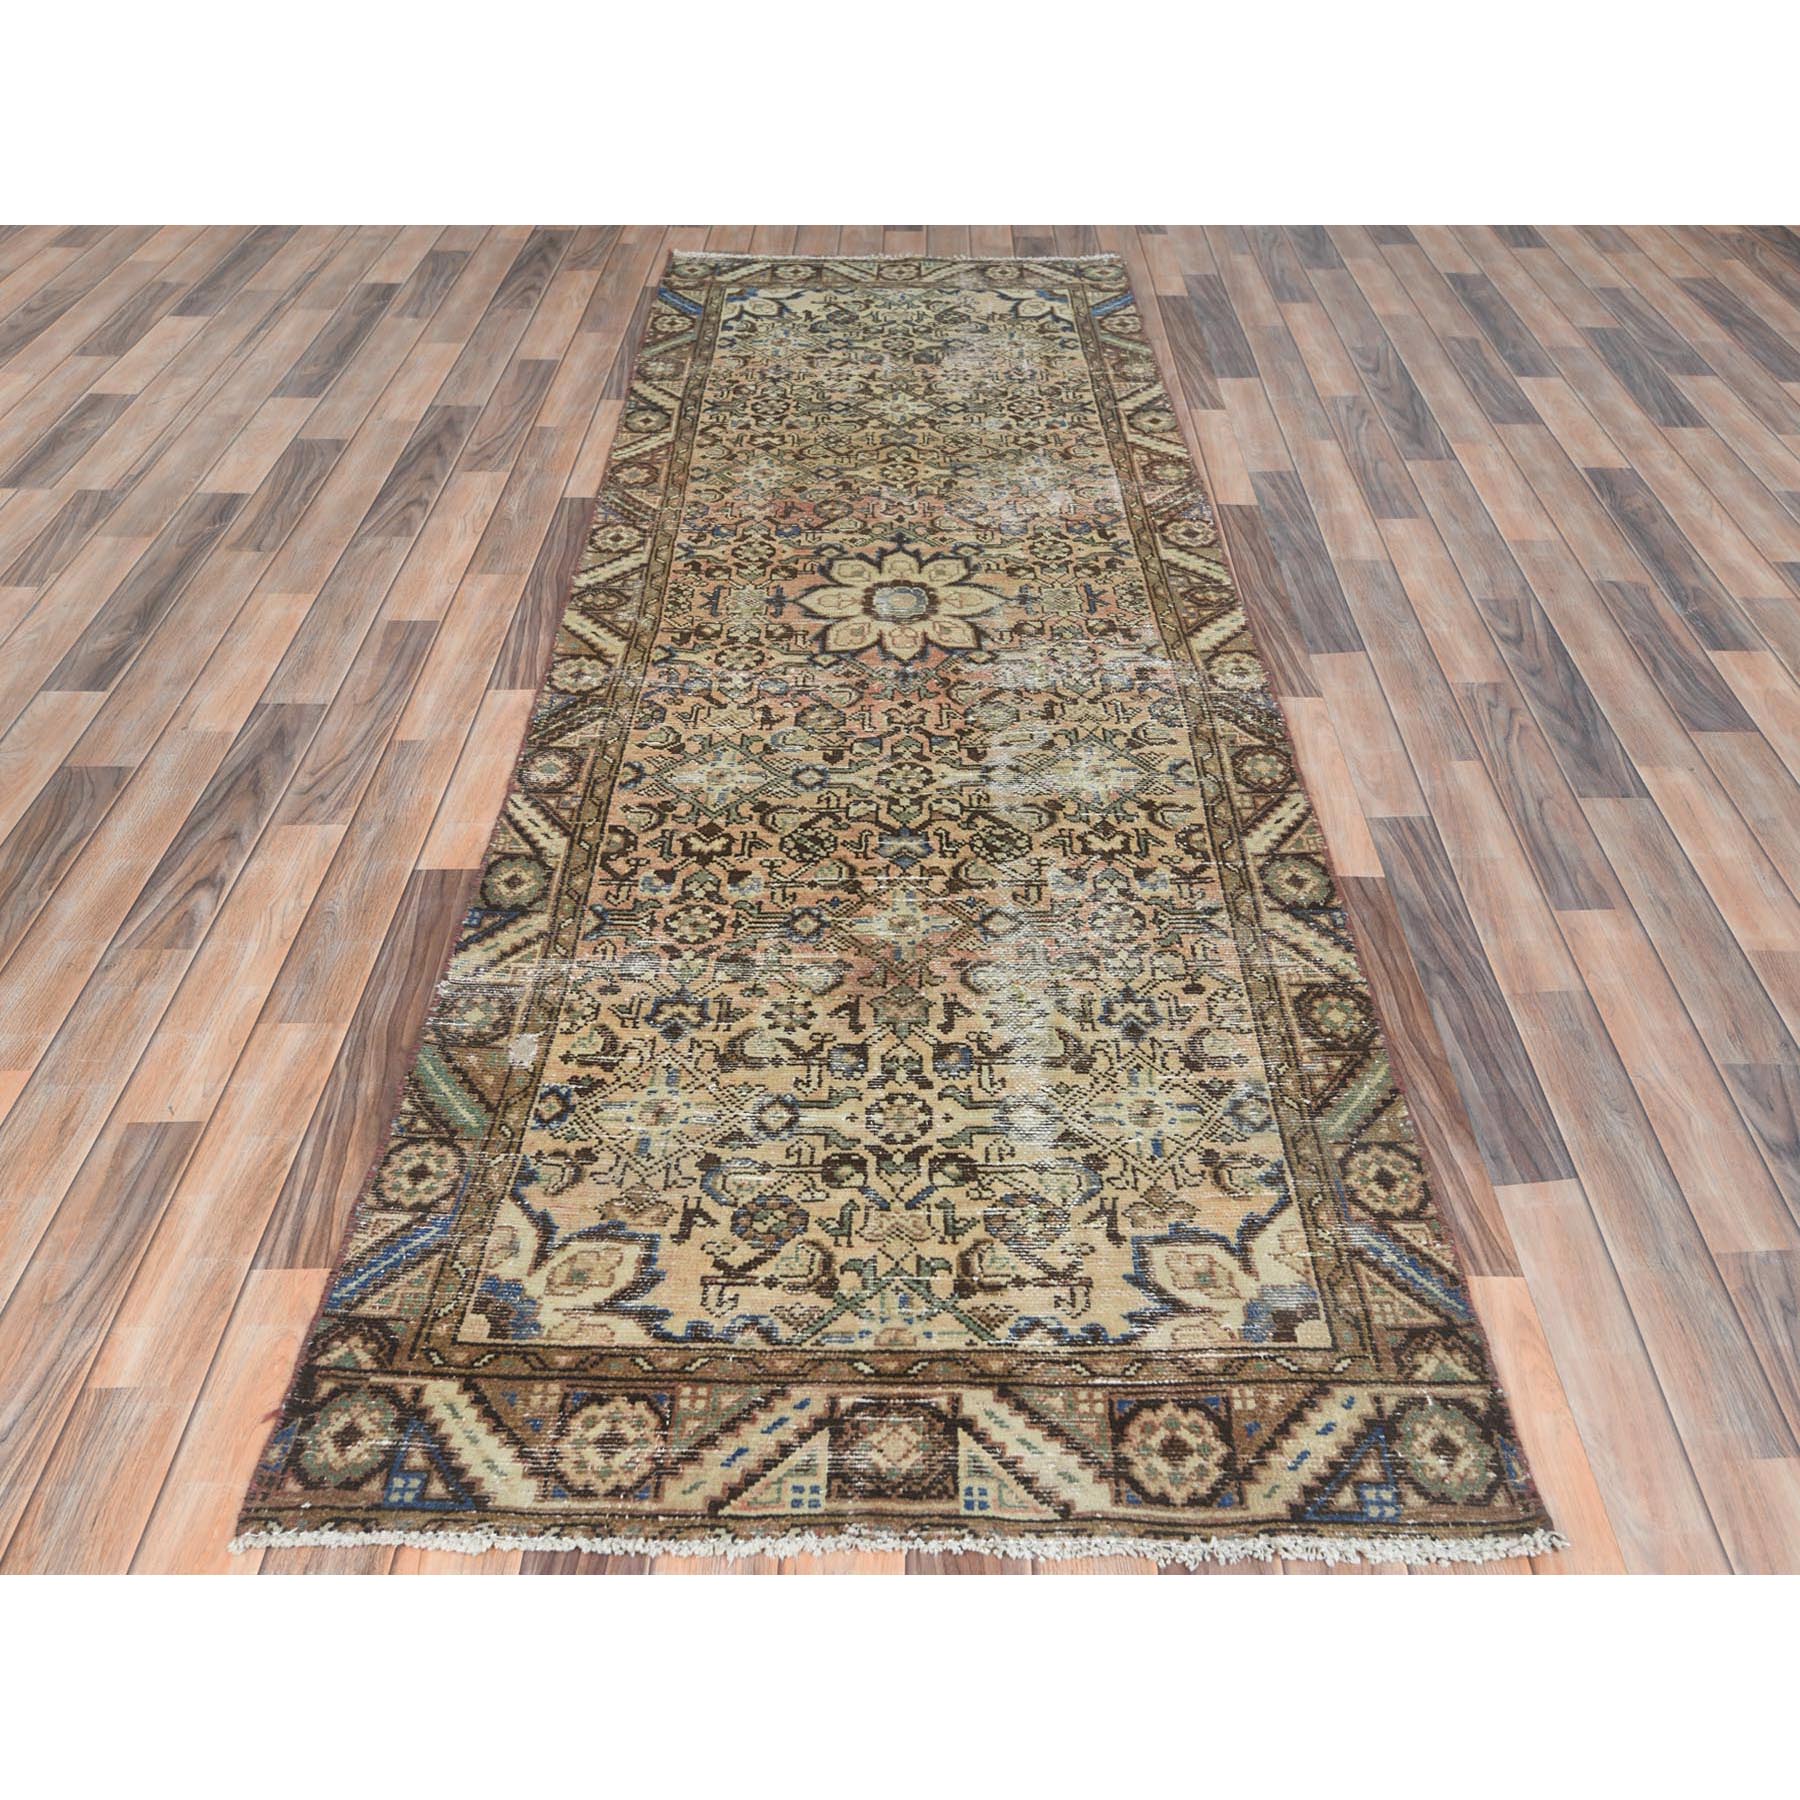 3'3"x9'9" Sand Color Worn Down Vintage Persian Hamadan with Fish Mahi Design, Hand Woven, Distressed Look, Pure Wool Wide Runner Oriental Rug 